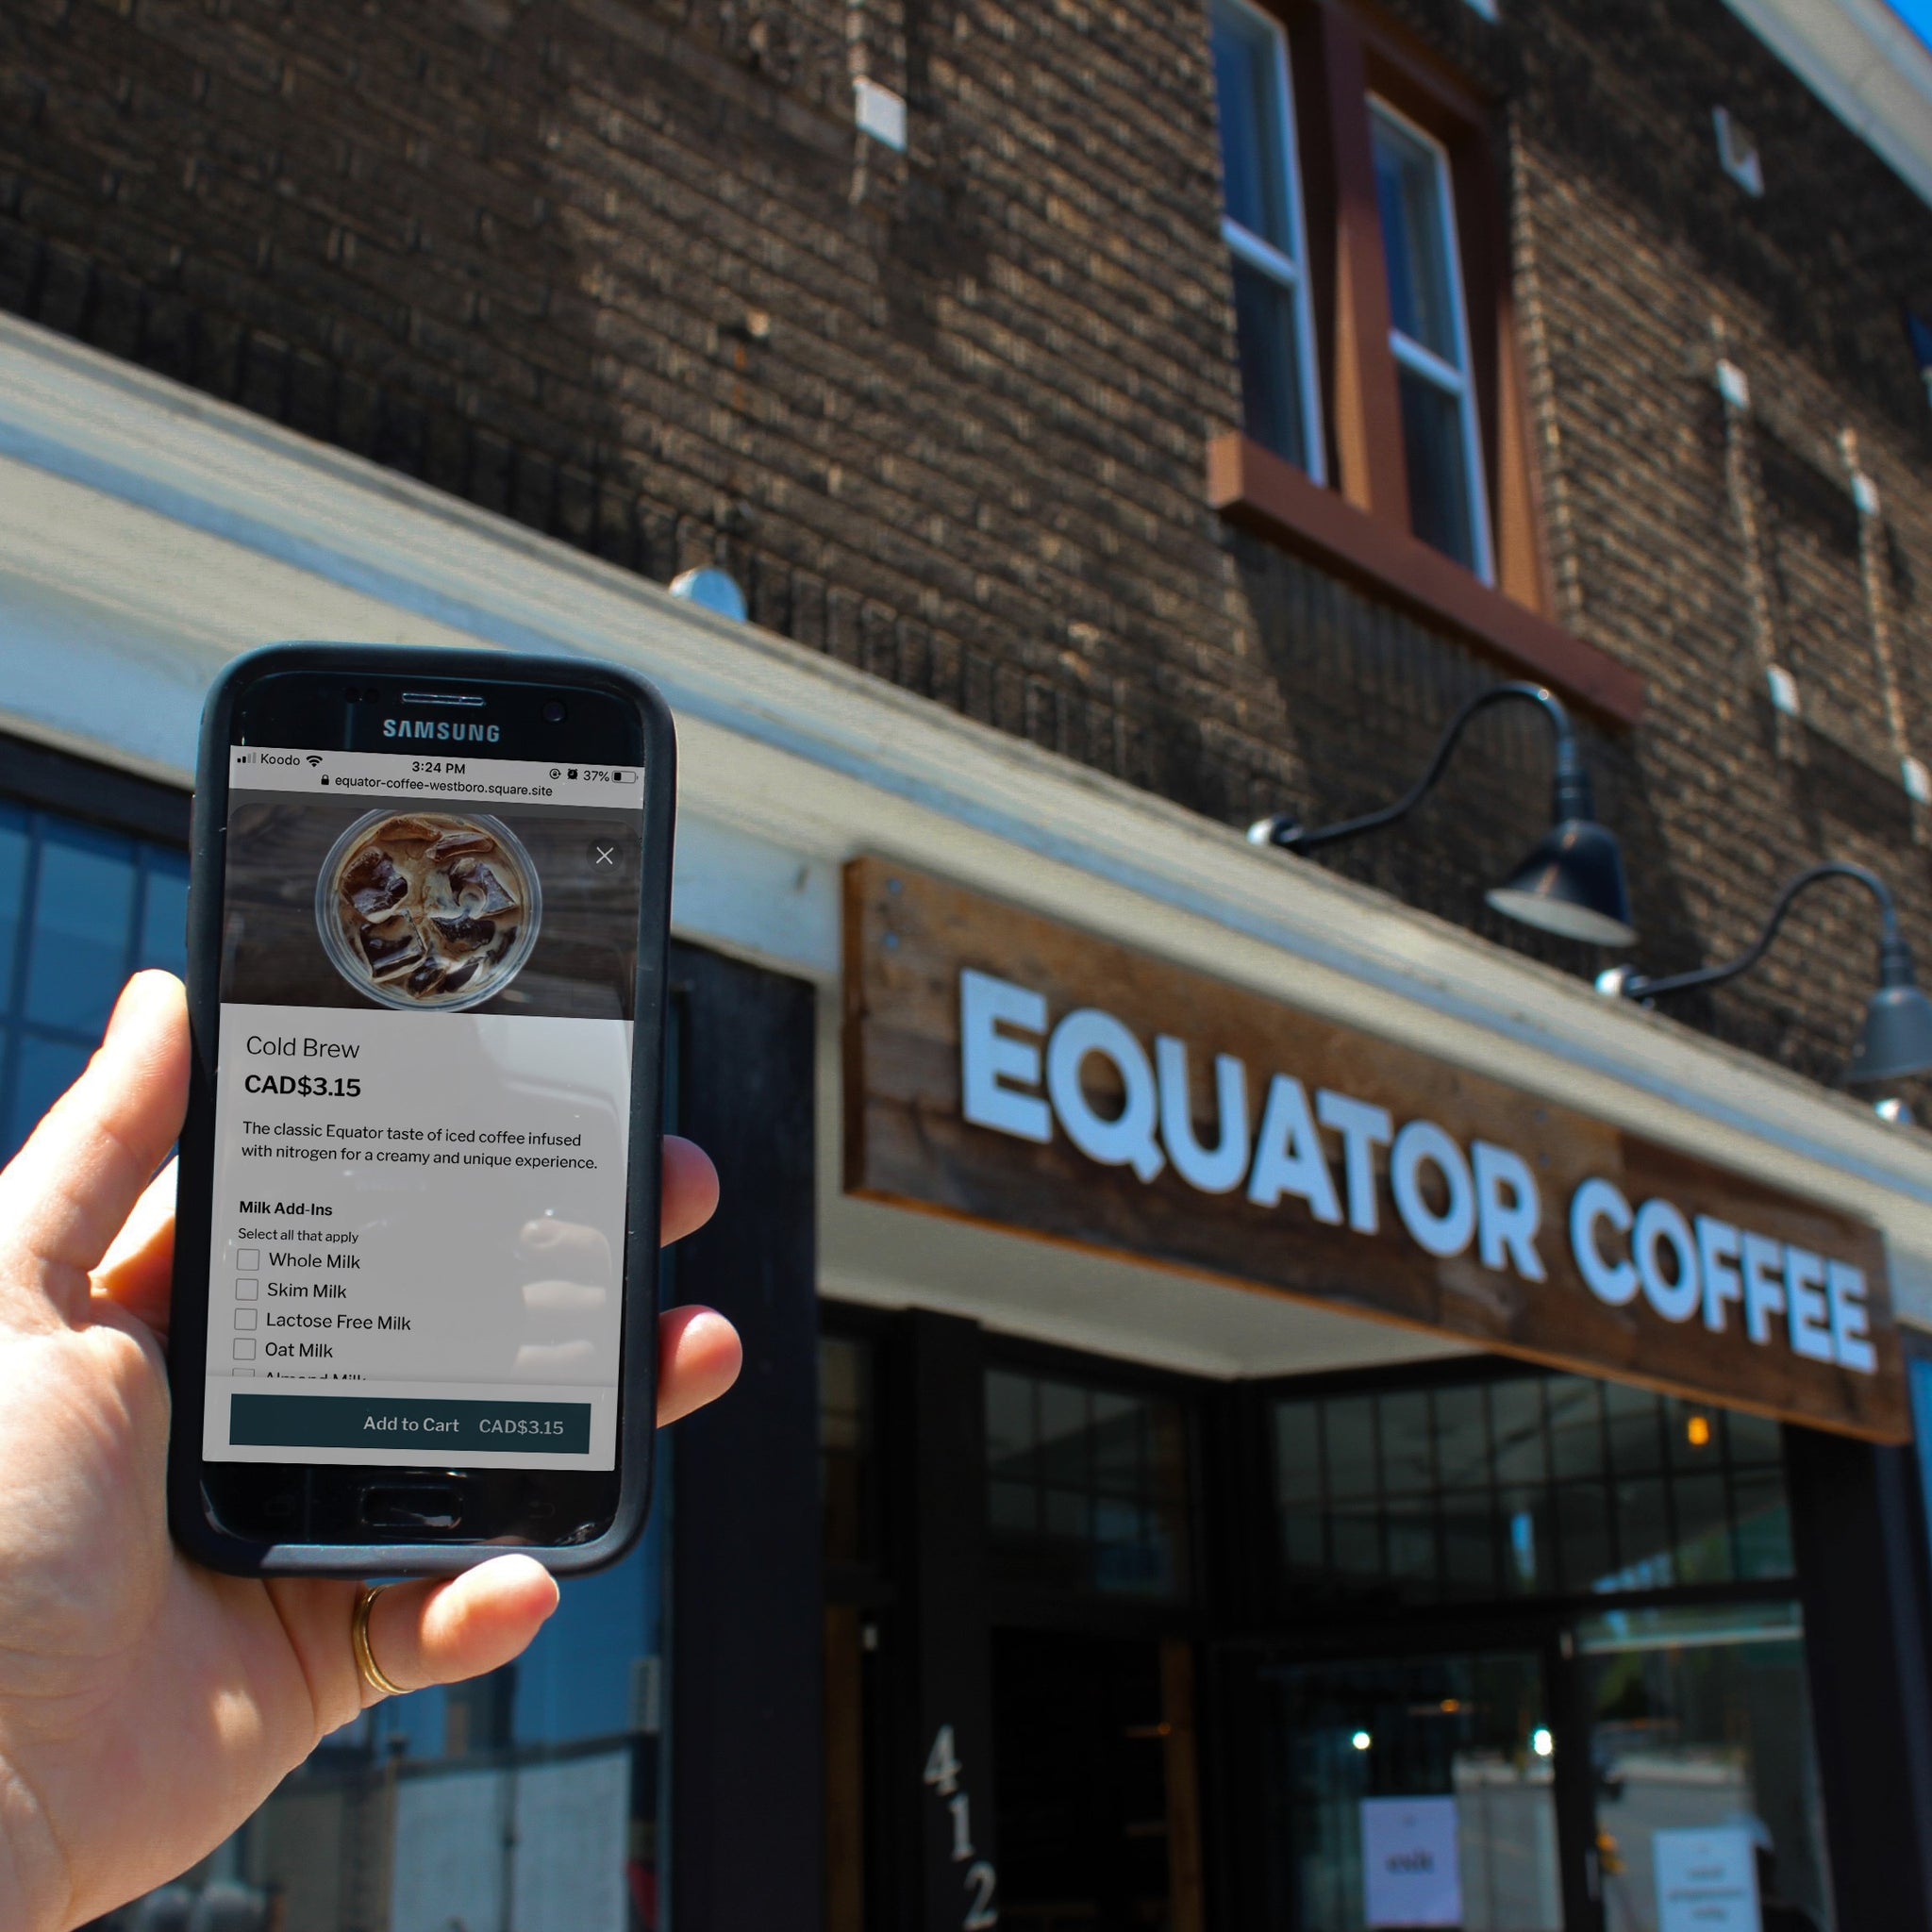 A person holding a phone with the Equator App showing, and they are in front one of our cafes.